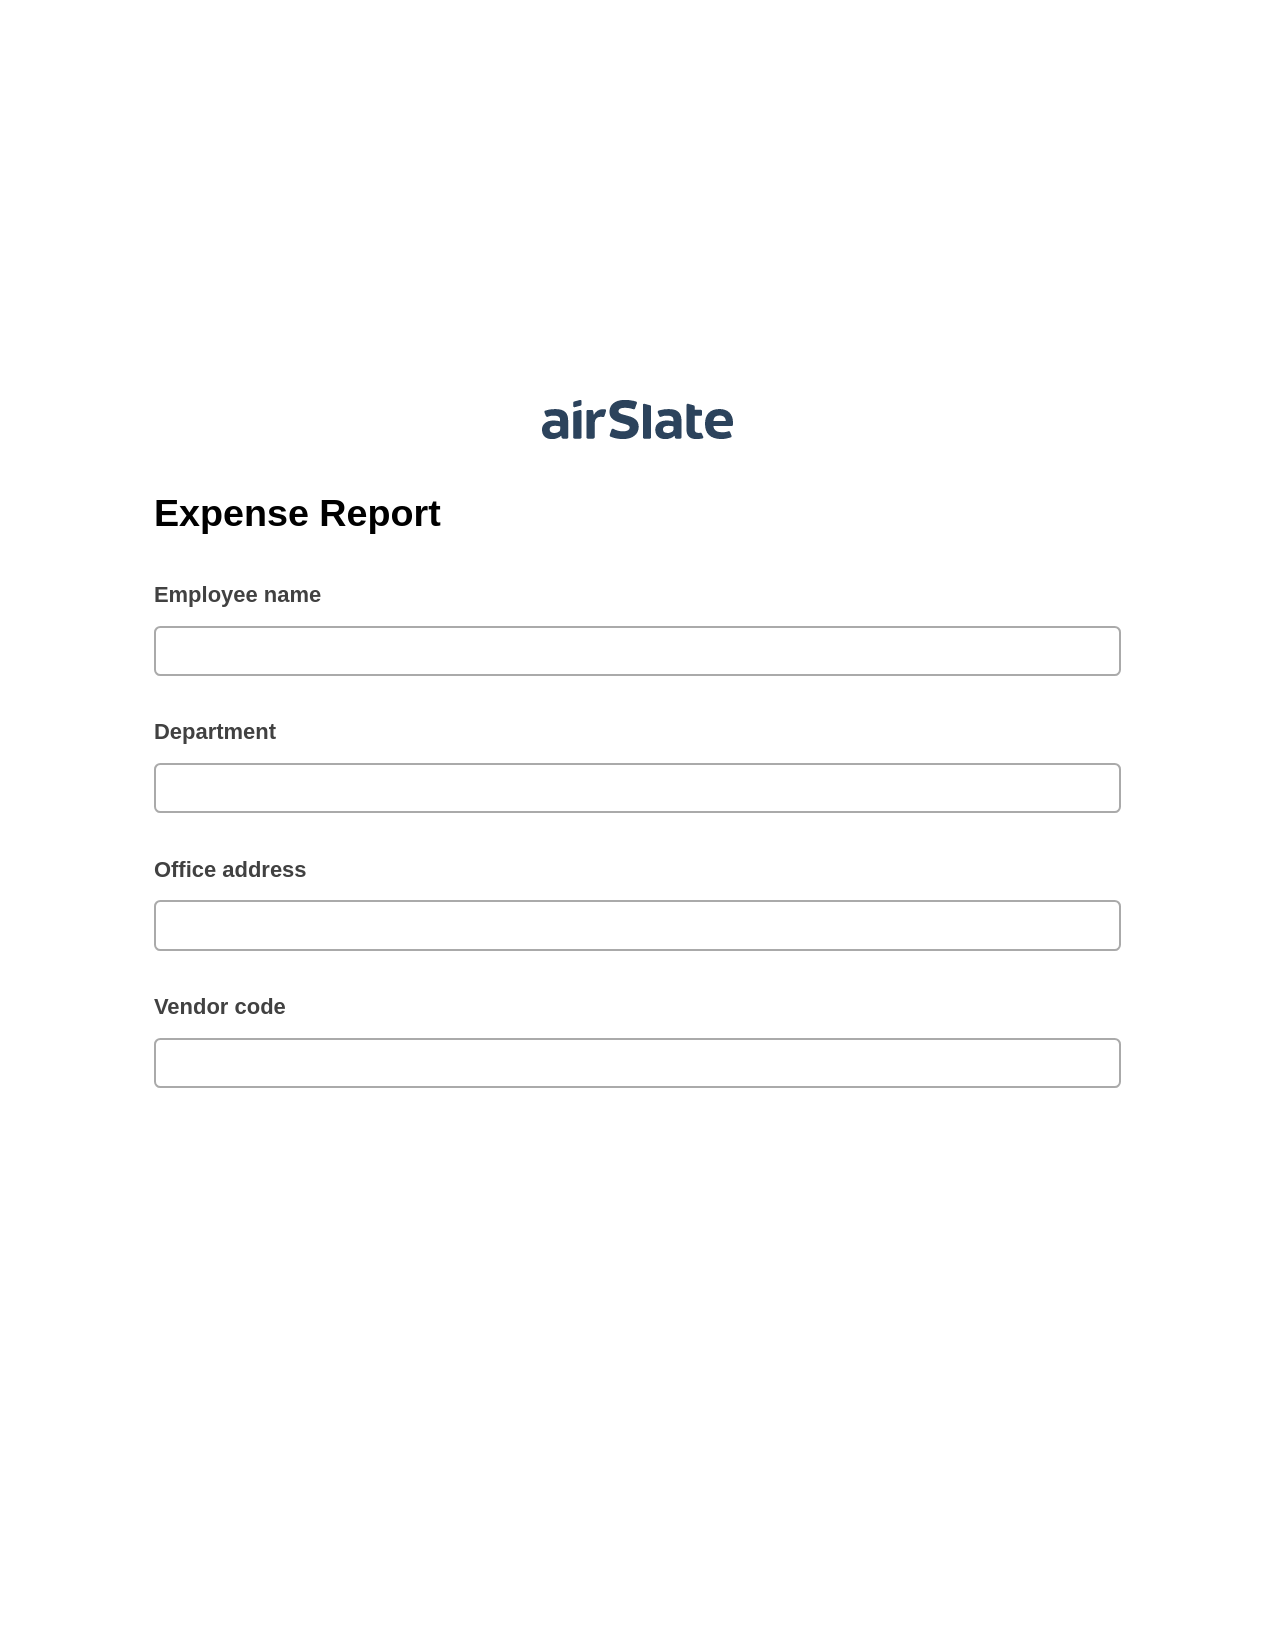 Expense Report Pre-fill from Excel Spreadsheet Bot, Audit Trail Bot, OneDrive Bot